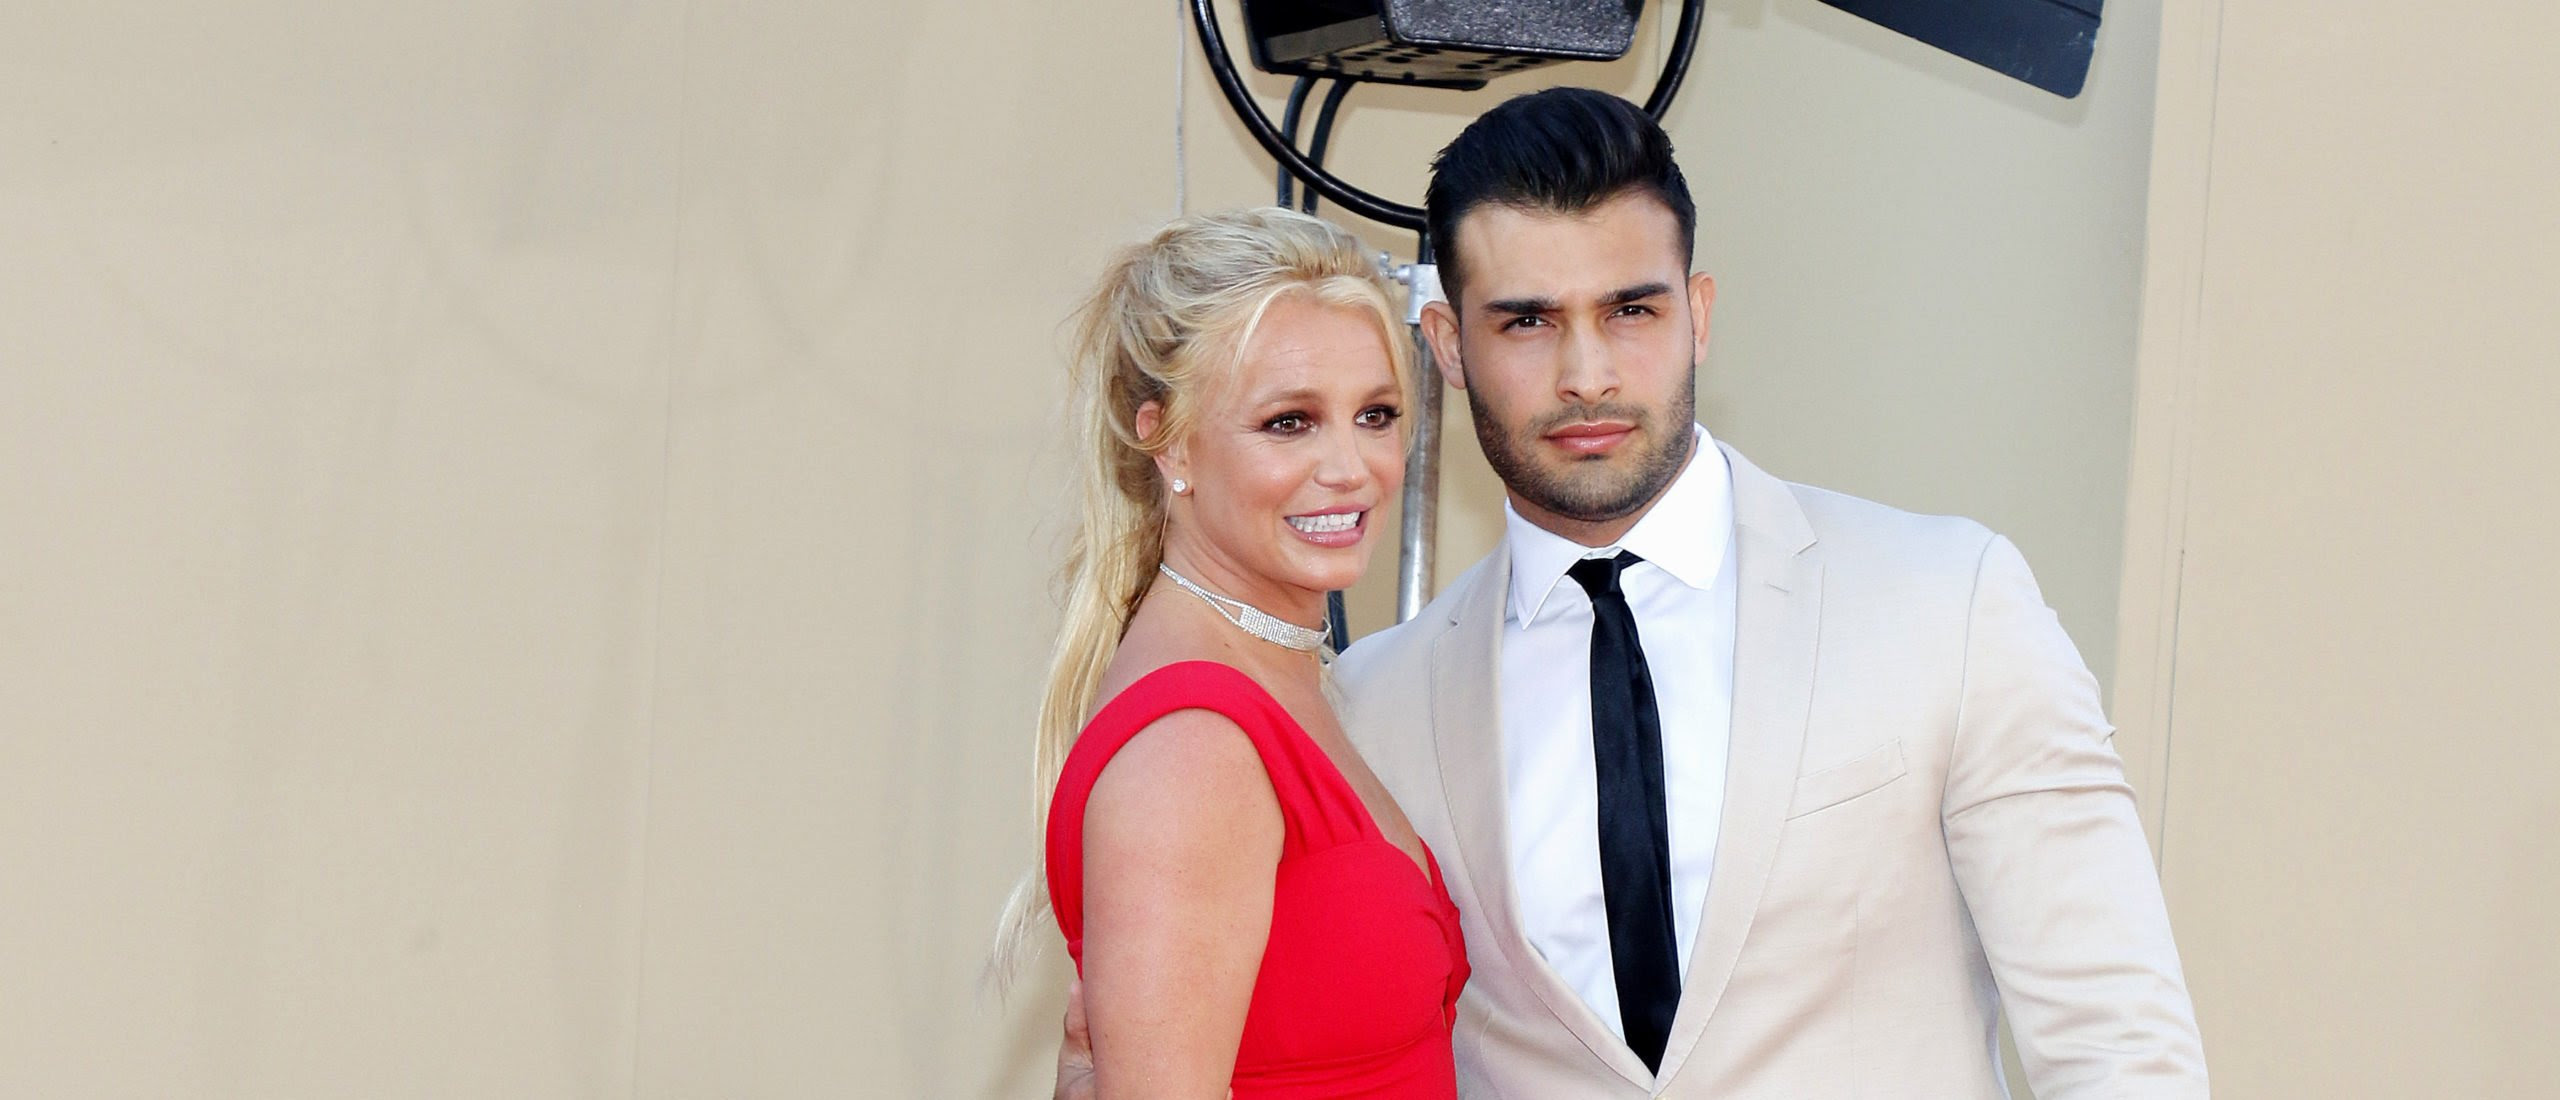 Britney Spears Shares Devastating Family News: ‘We Have Lost Our Miracle’